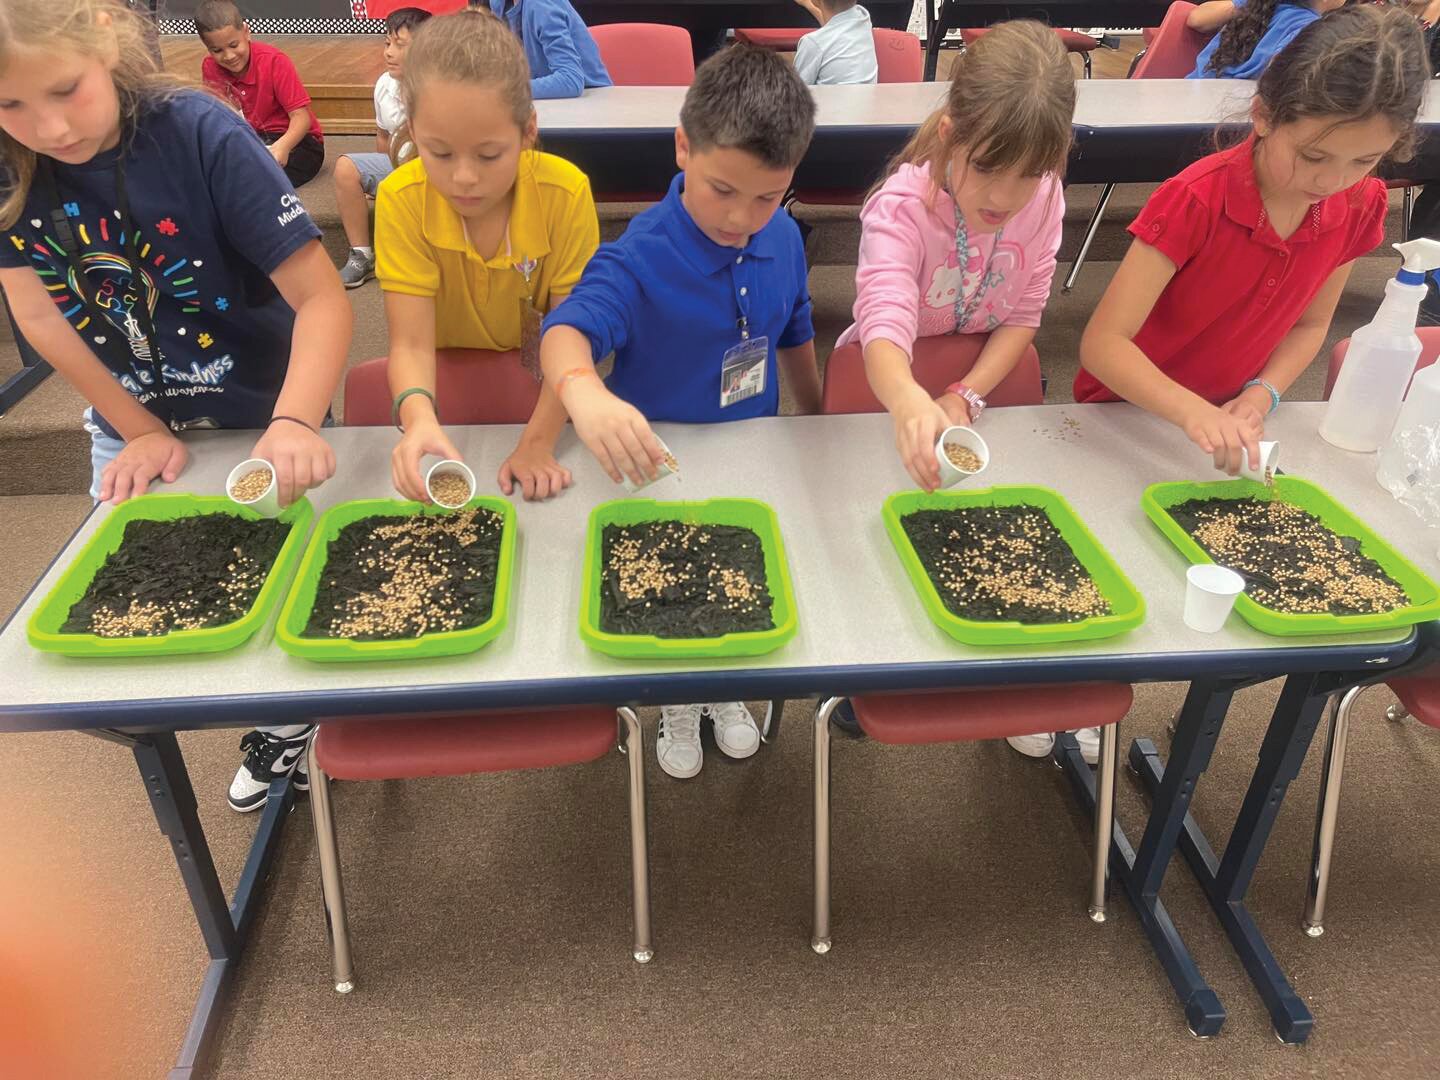 CLEWISTON -- Central Elementary School second graders are learning about how plants grow. They started their own garden with cilantro seeds. For more photos, see the school's page on Facebook. [Photo courtesy Central Elementary School]